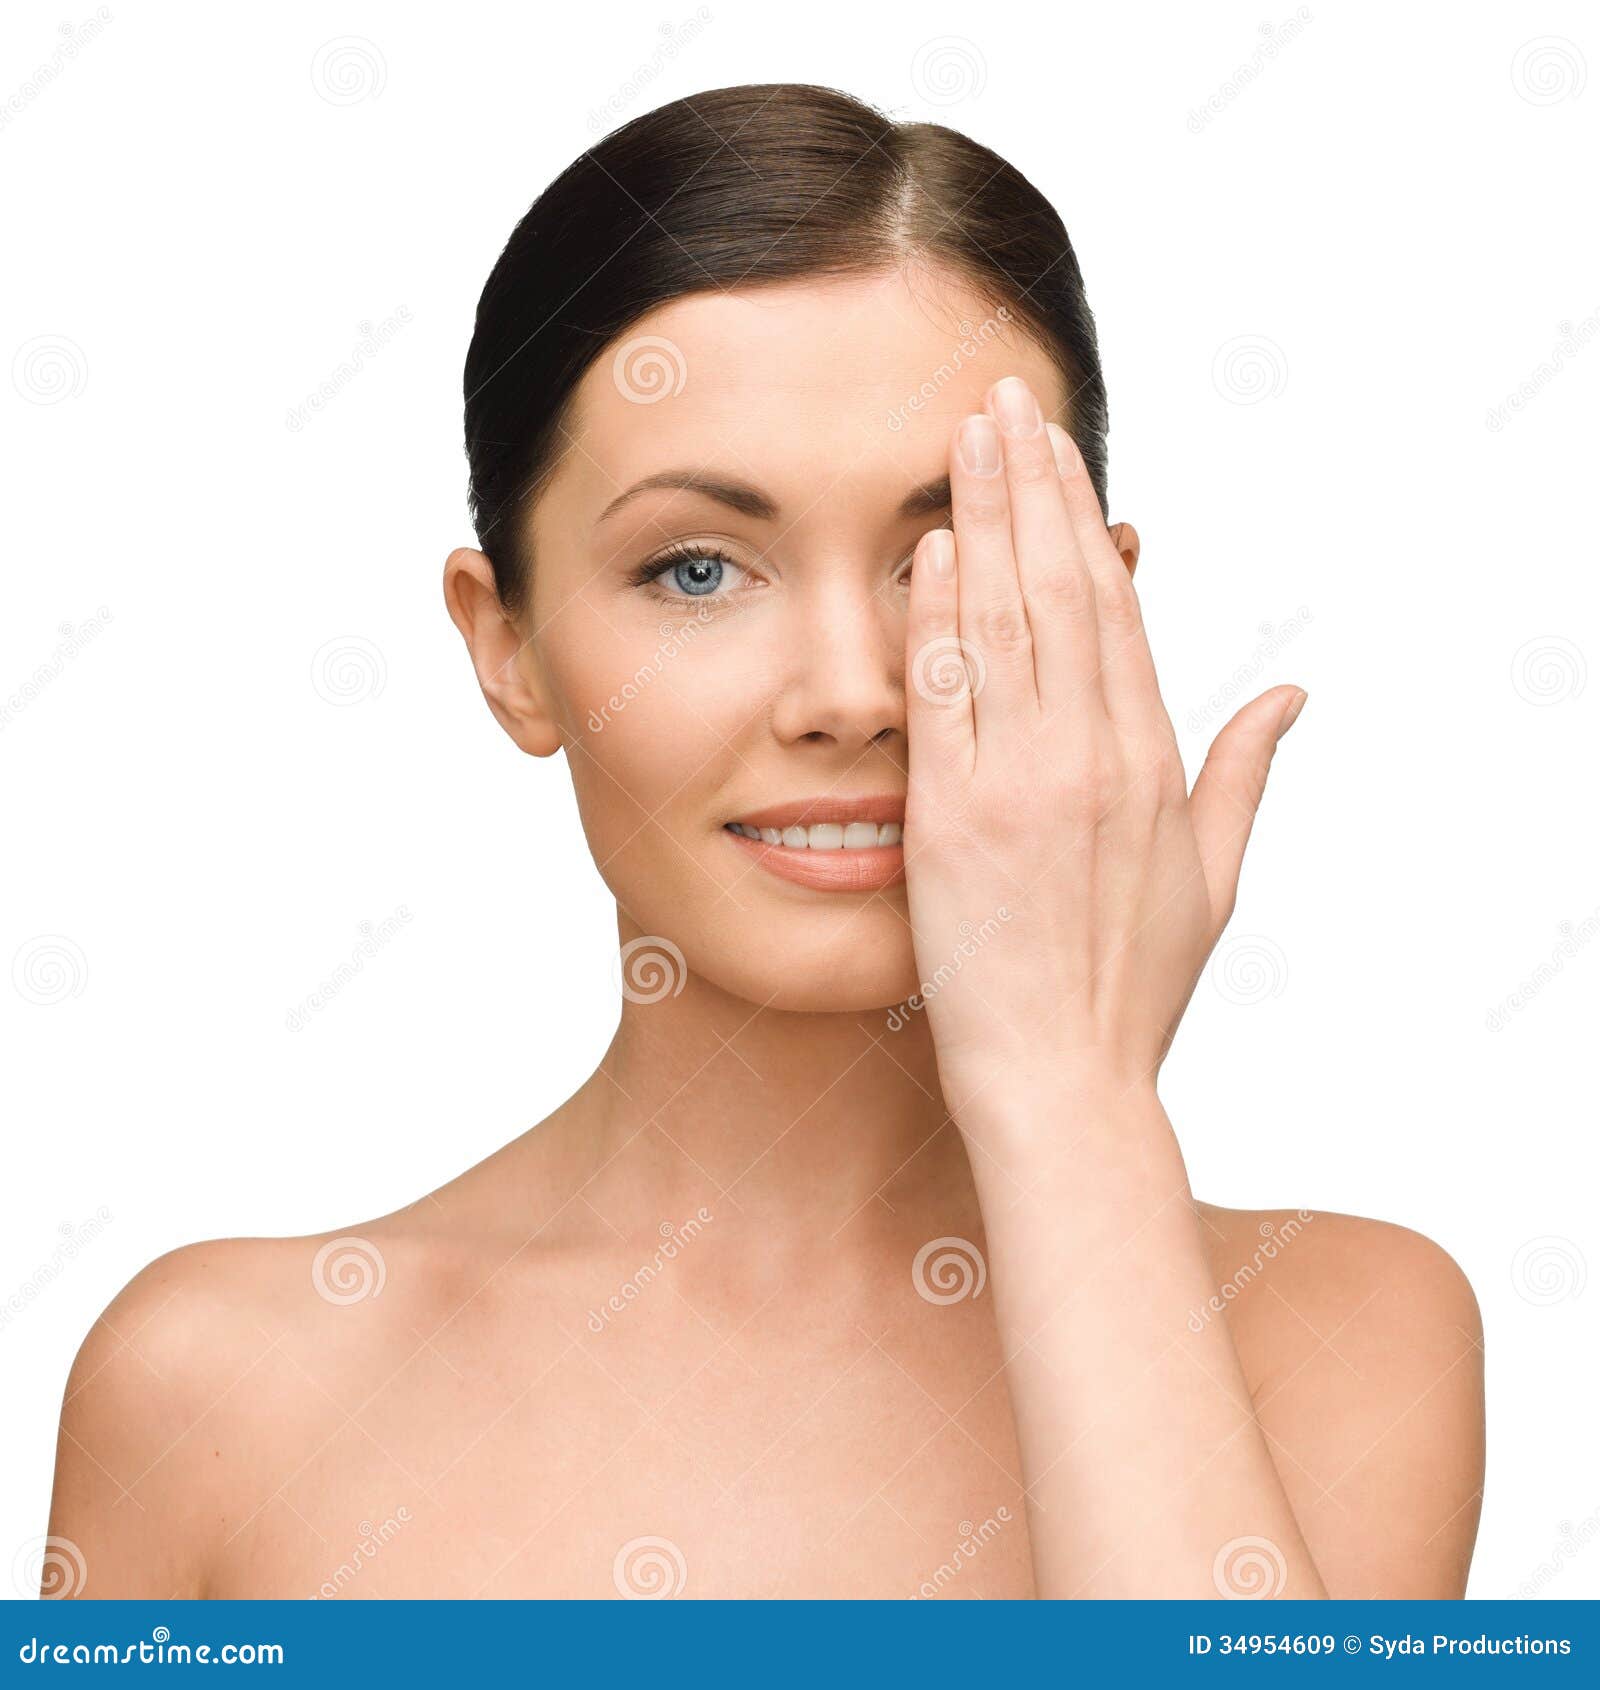 Smiling young woman covering face with hand Royalty Free Stock Images - smiling-young-woman-covering-face-hand-beauty-spa-health-concept-half-34954609